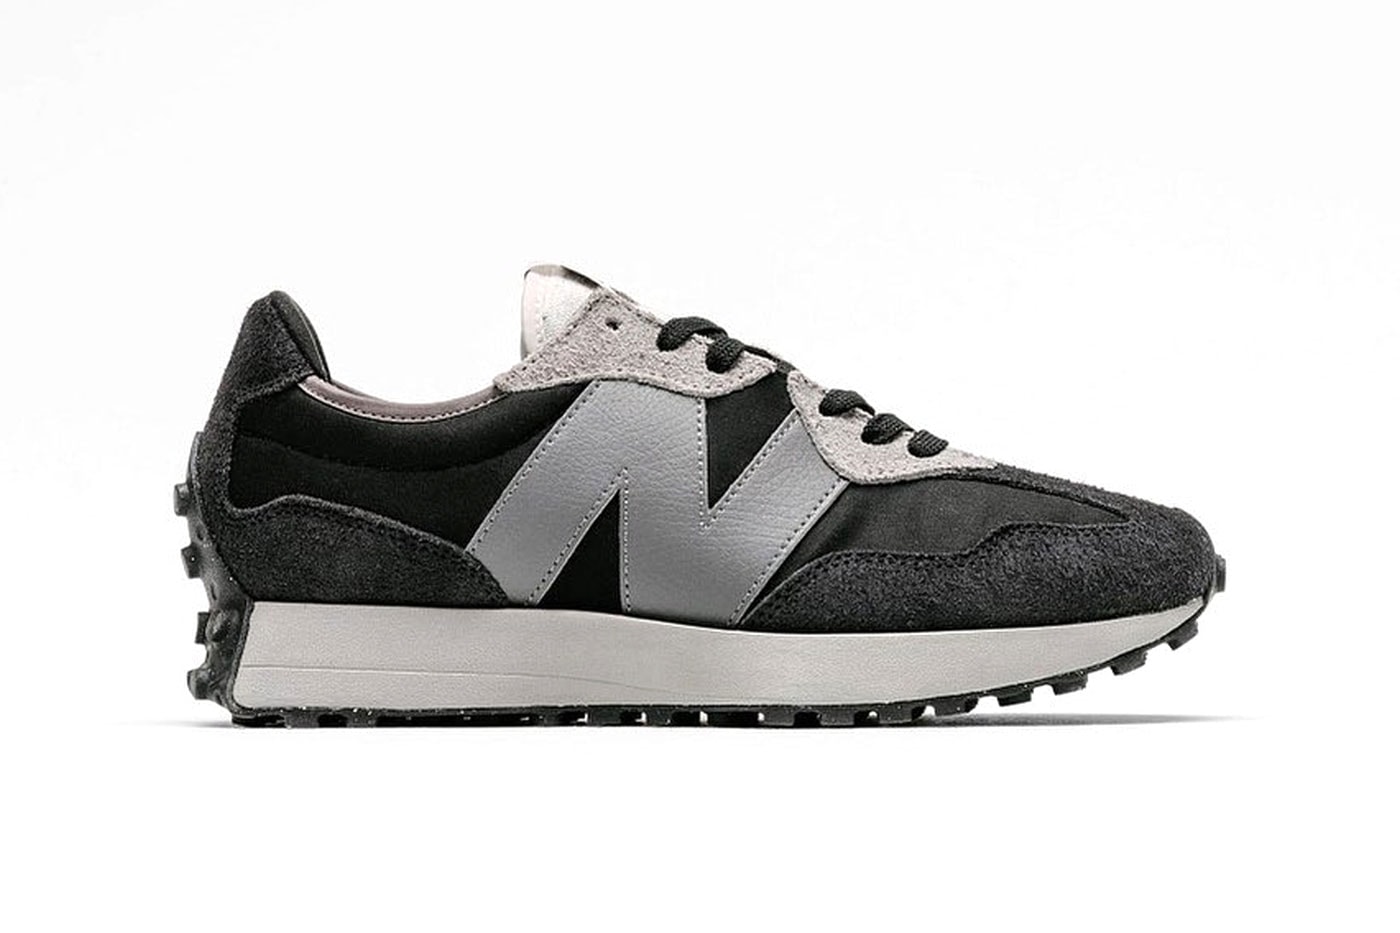 New Balance Grey Day Three Heritage eco friendly renditions 327 5740 XC72 green leaf standard release info date price